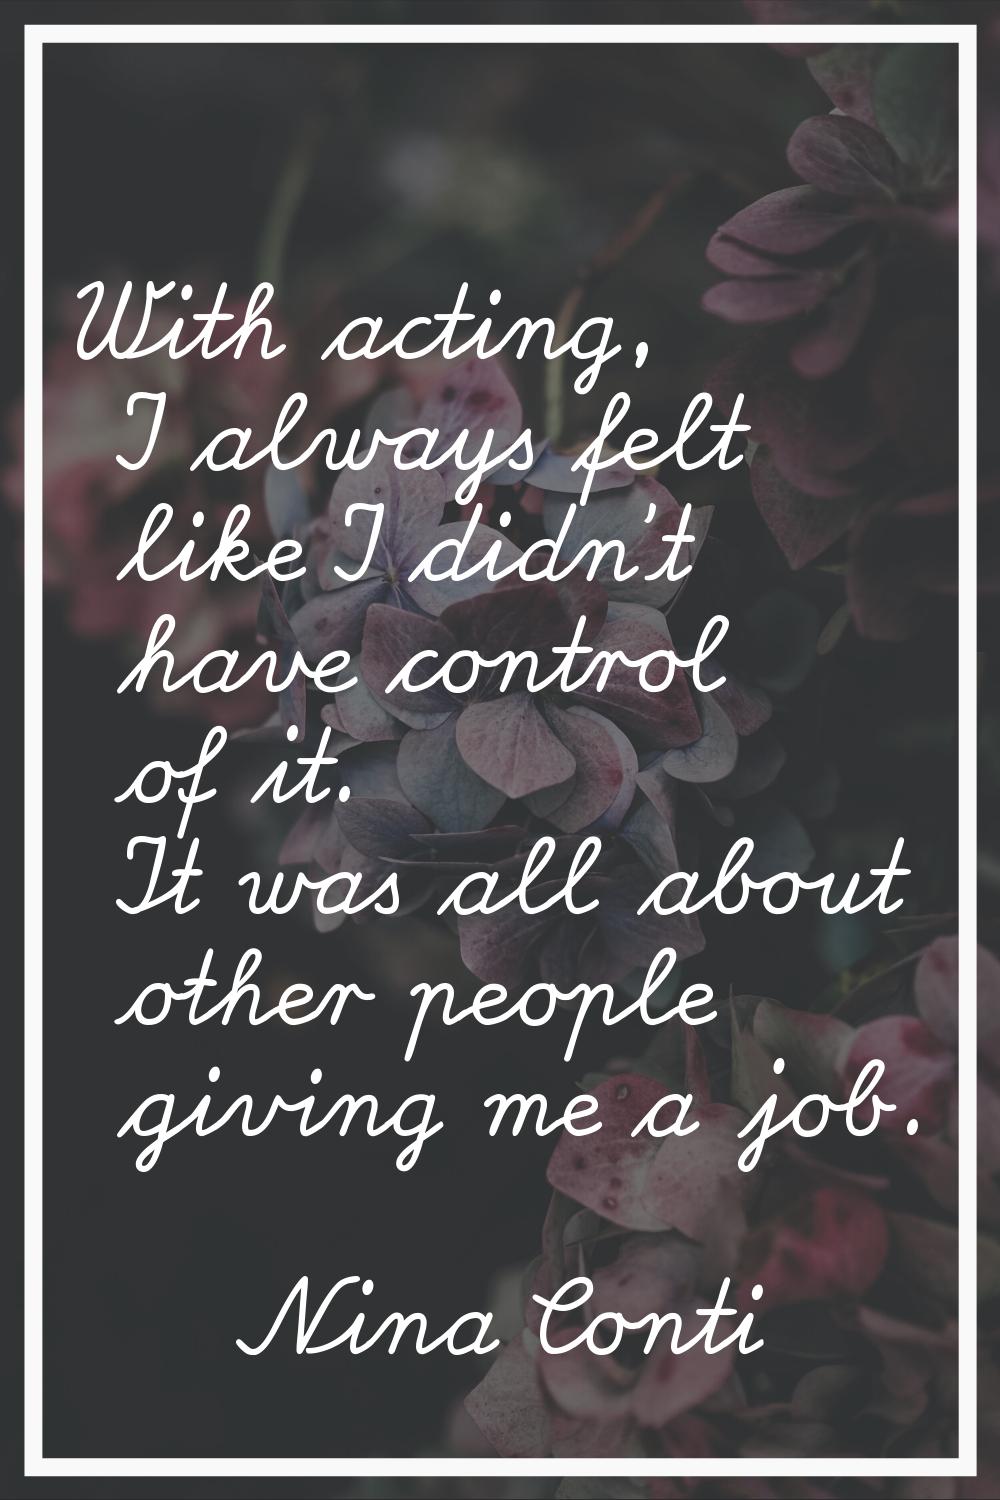 With acting, I always felt like I didn't have control of it. It was all about other people giving m